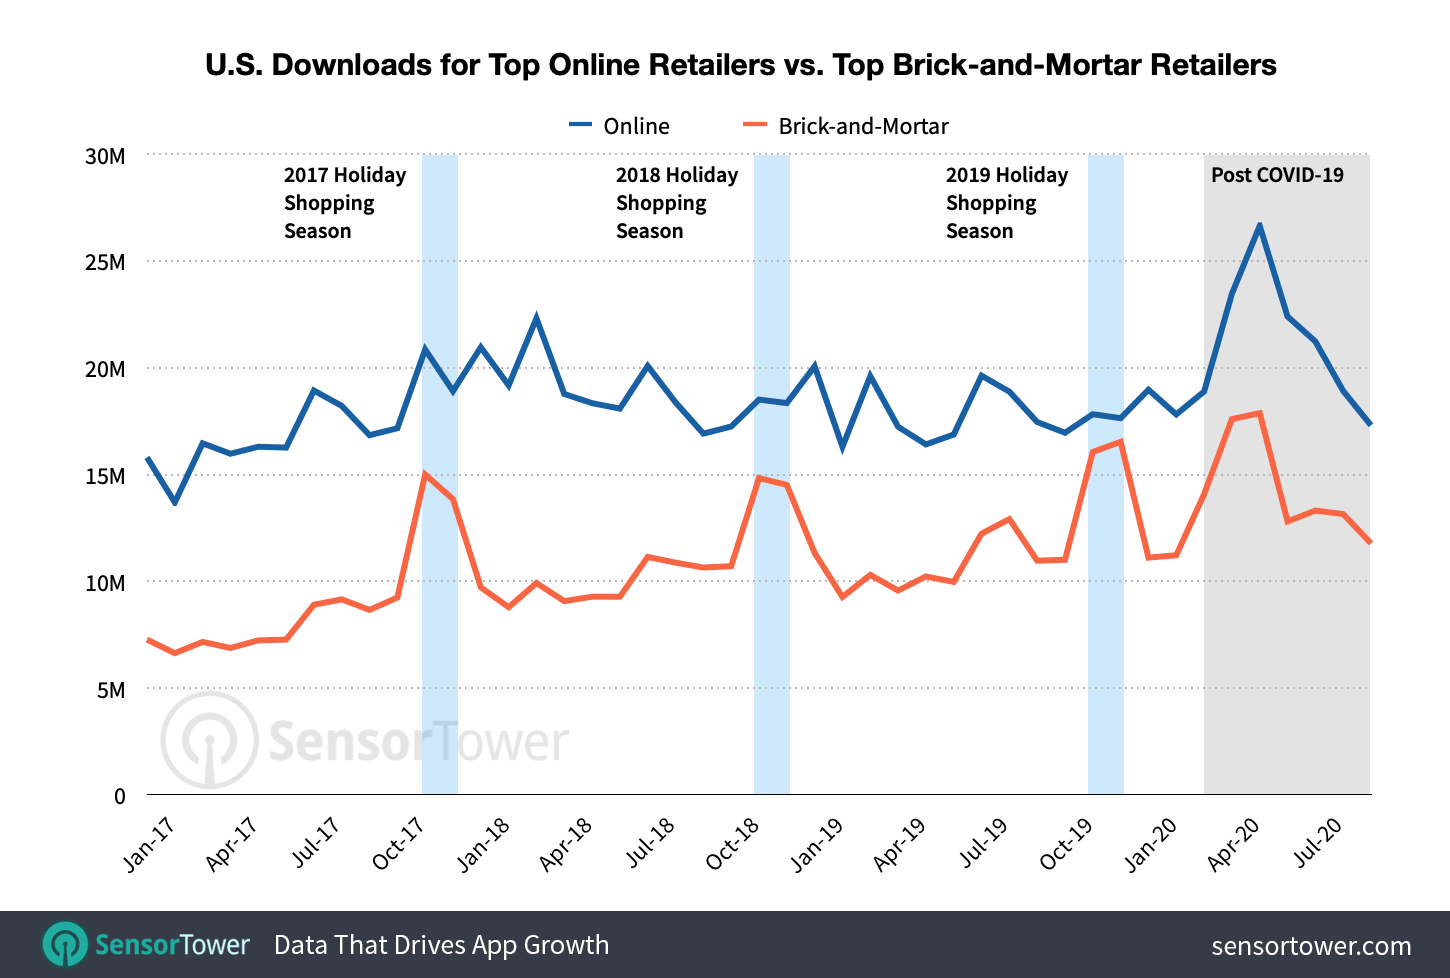 Although the top online retail apps had more overall downloads, the top B&M apps experienced more year-over-year growth in 2020